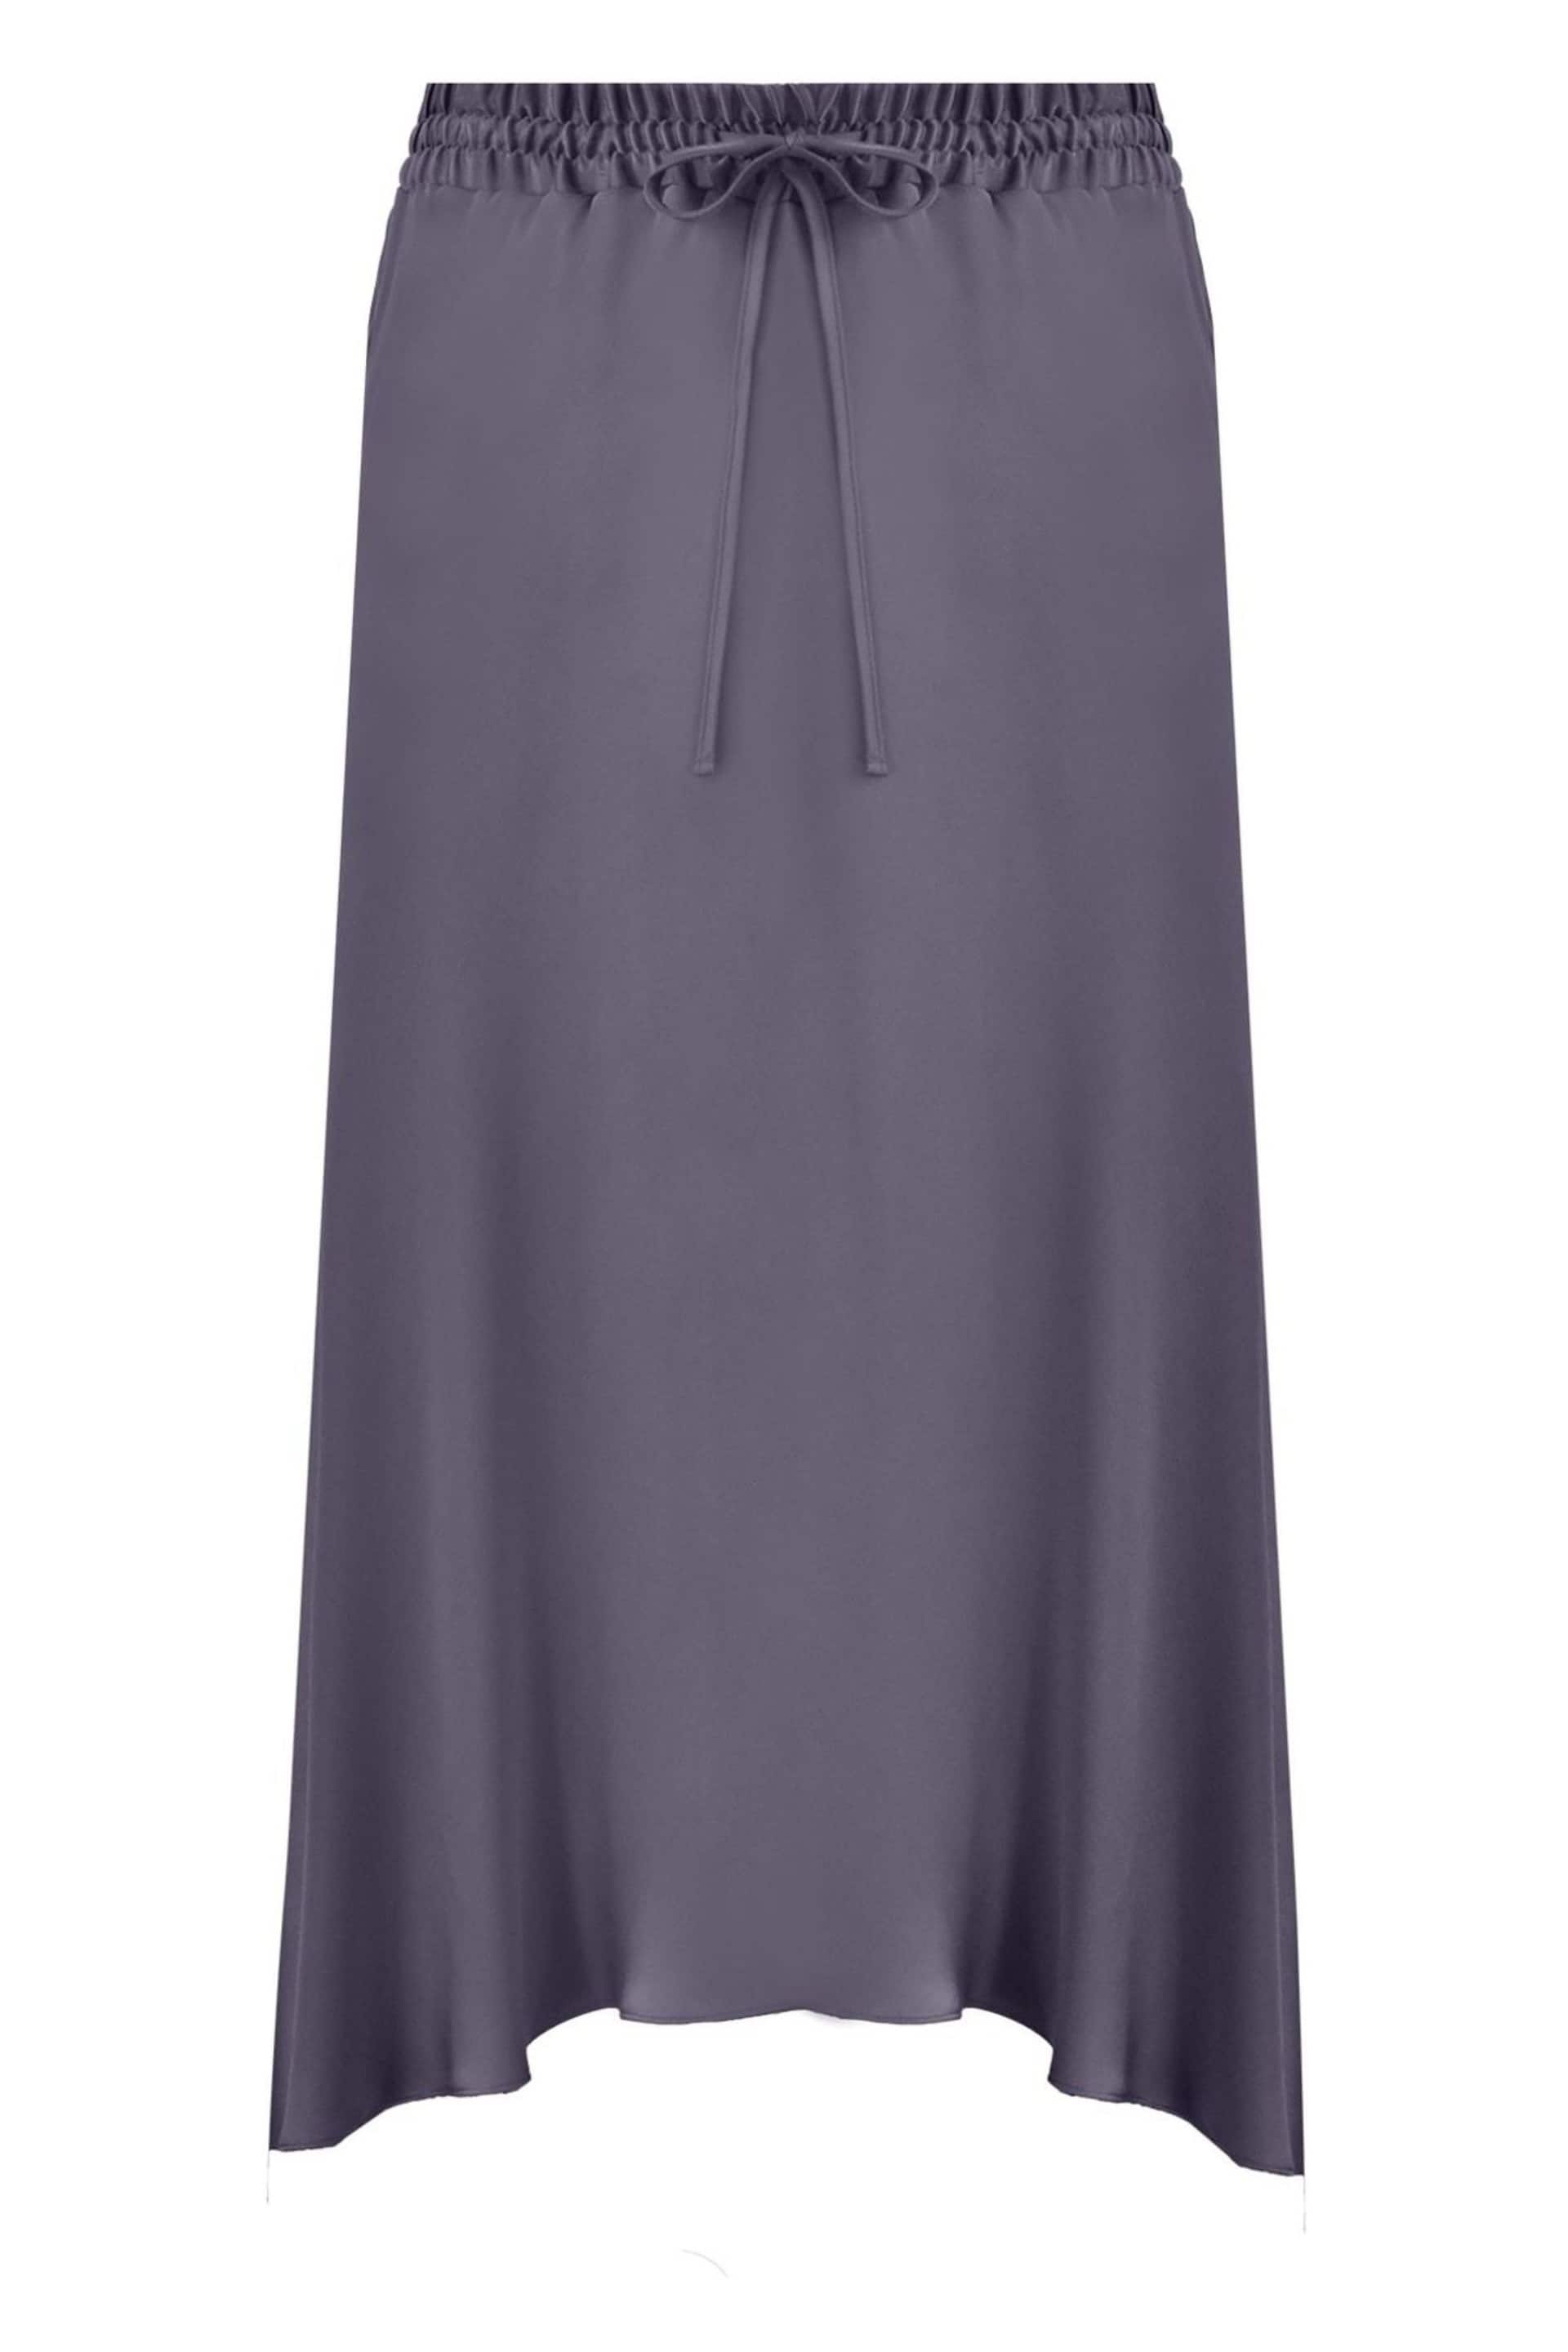 Live Unlimited Curve Grey Satin High Low Skirt - Image 2 of 2